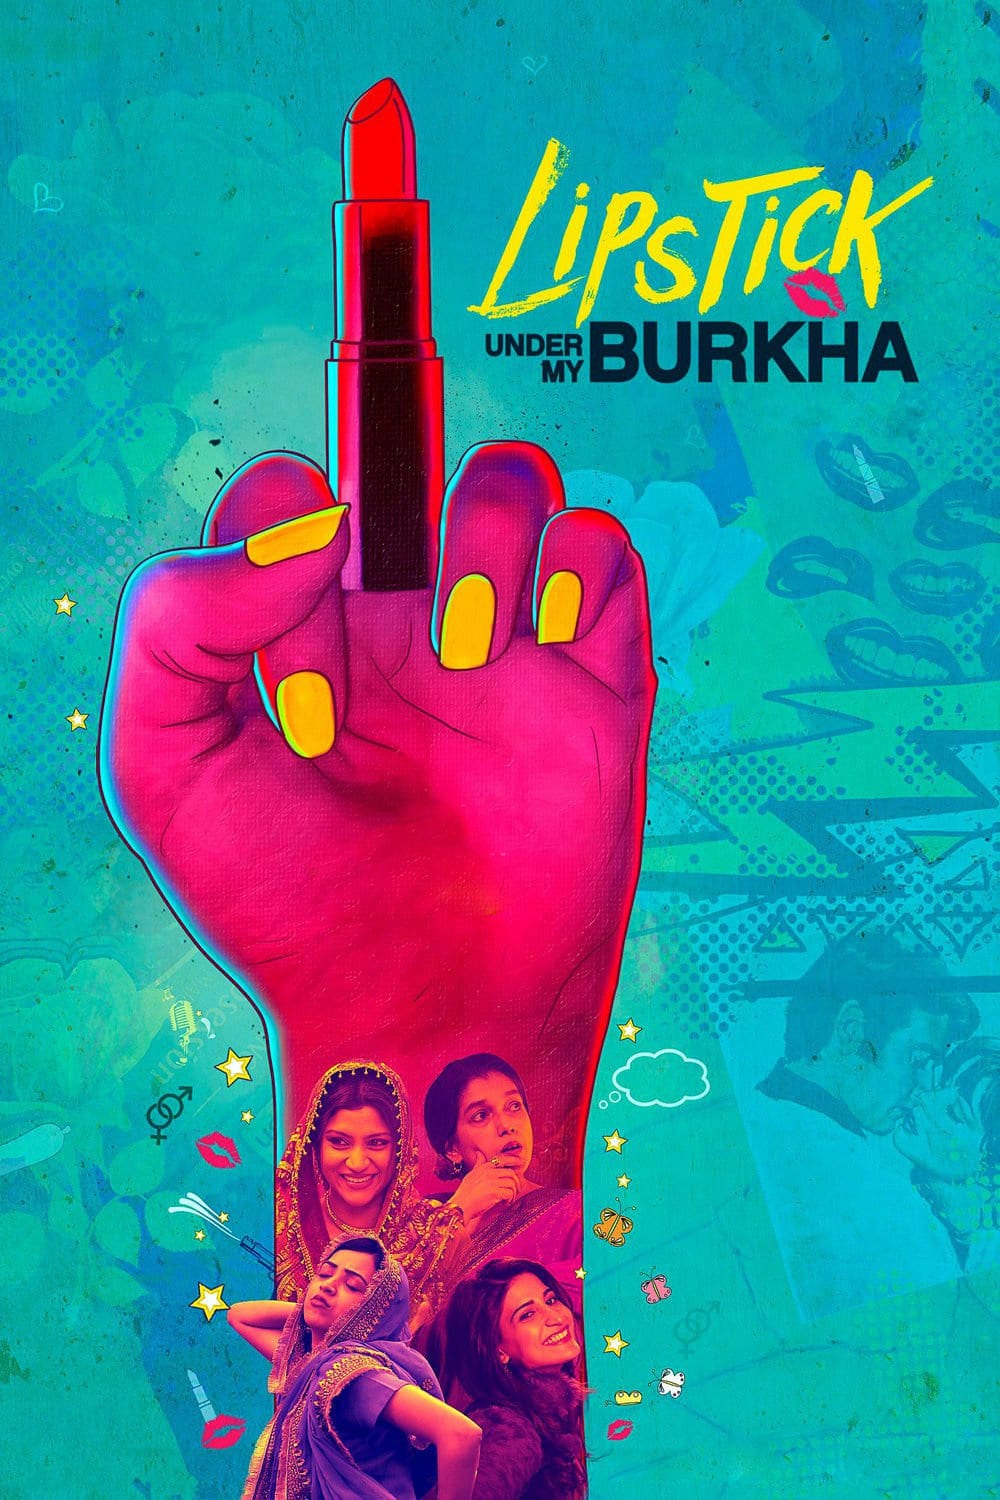 Poster for the movie "Lipstick Under My Burkha"